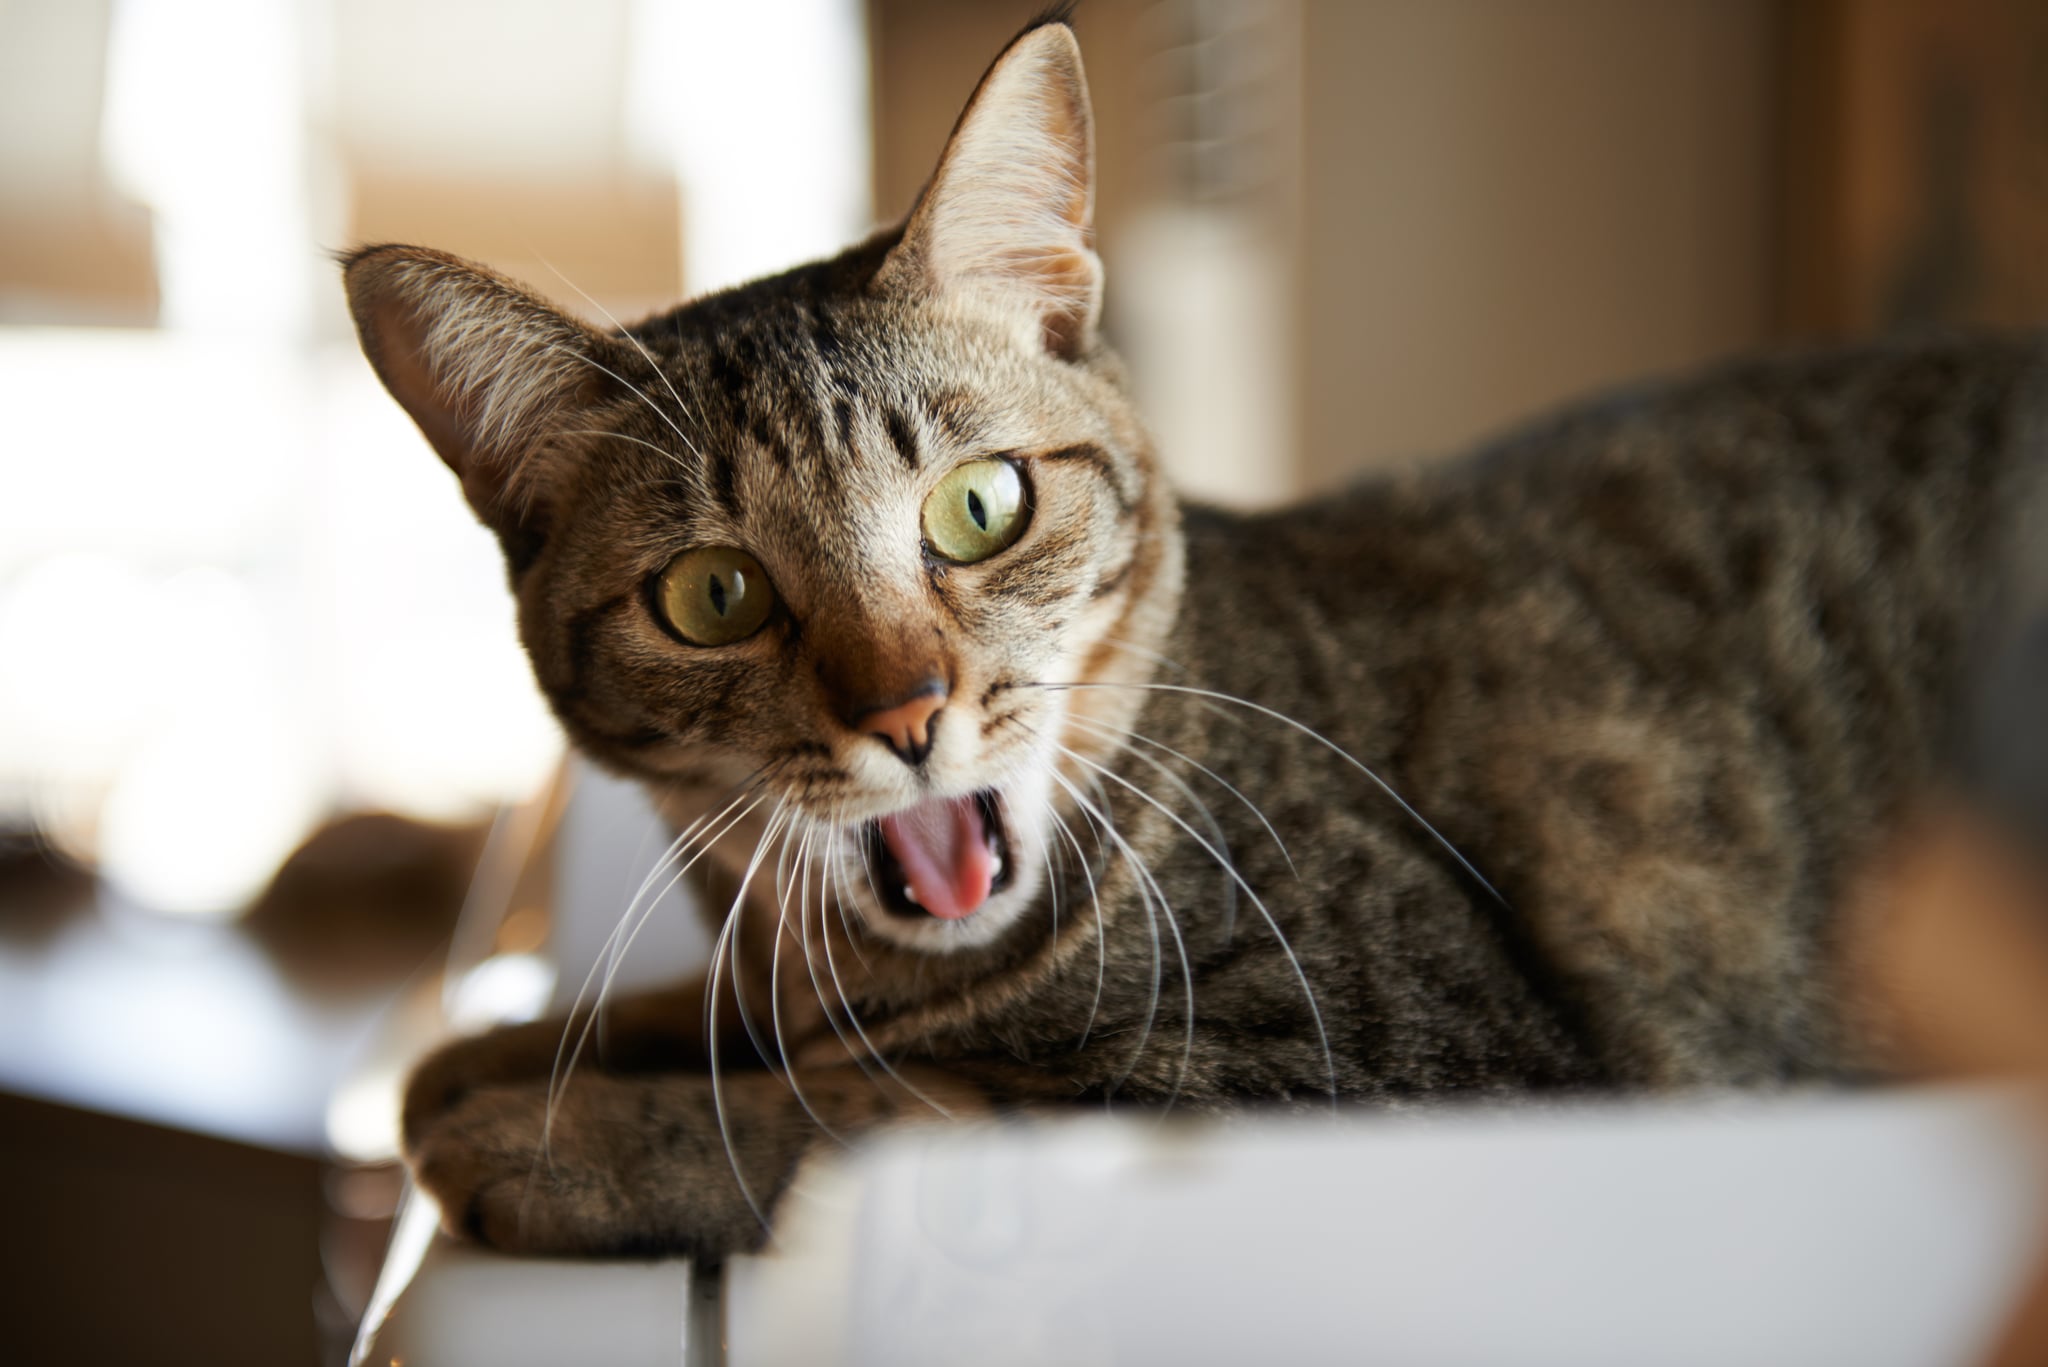 Why Does My Cat Cough and Not Bring Up a Hairball? | POPSUGAR Pets